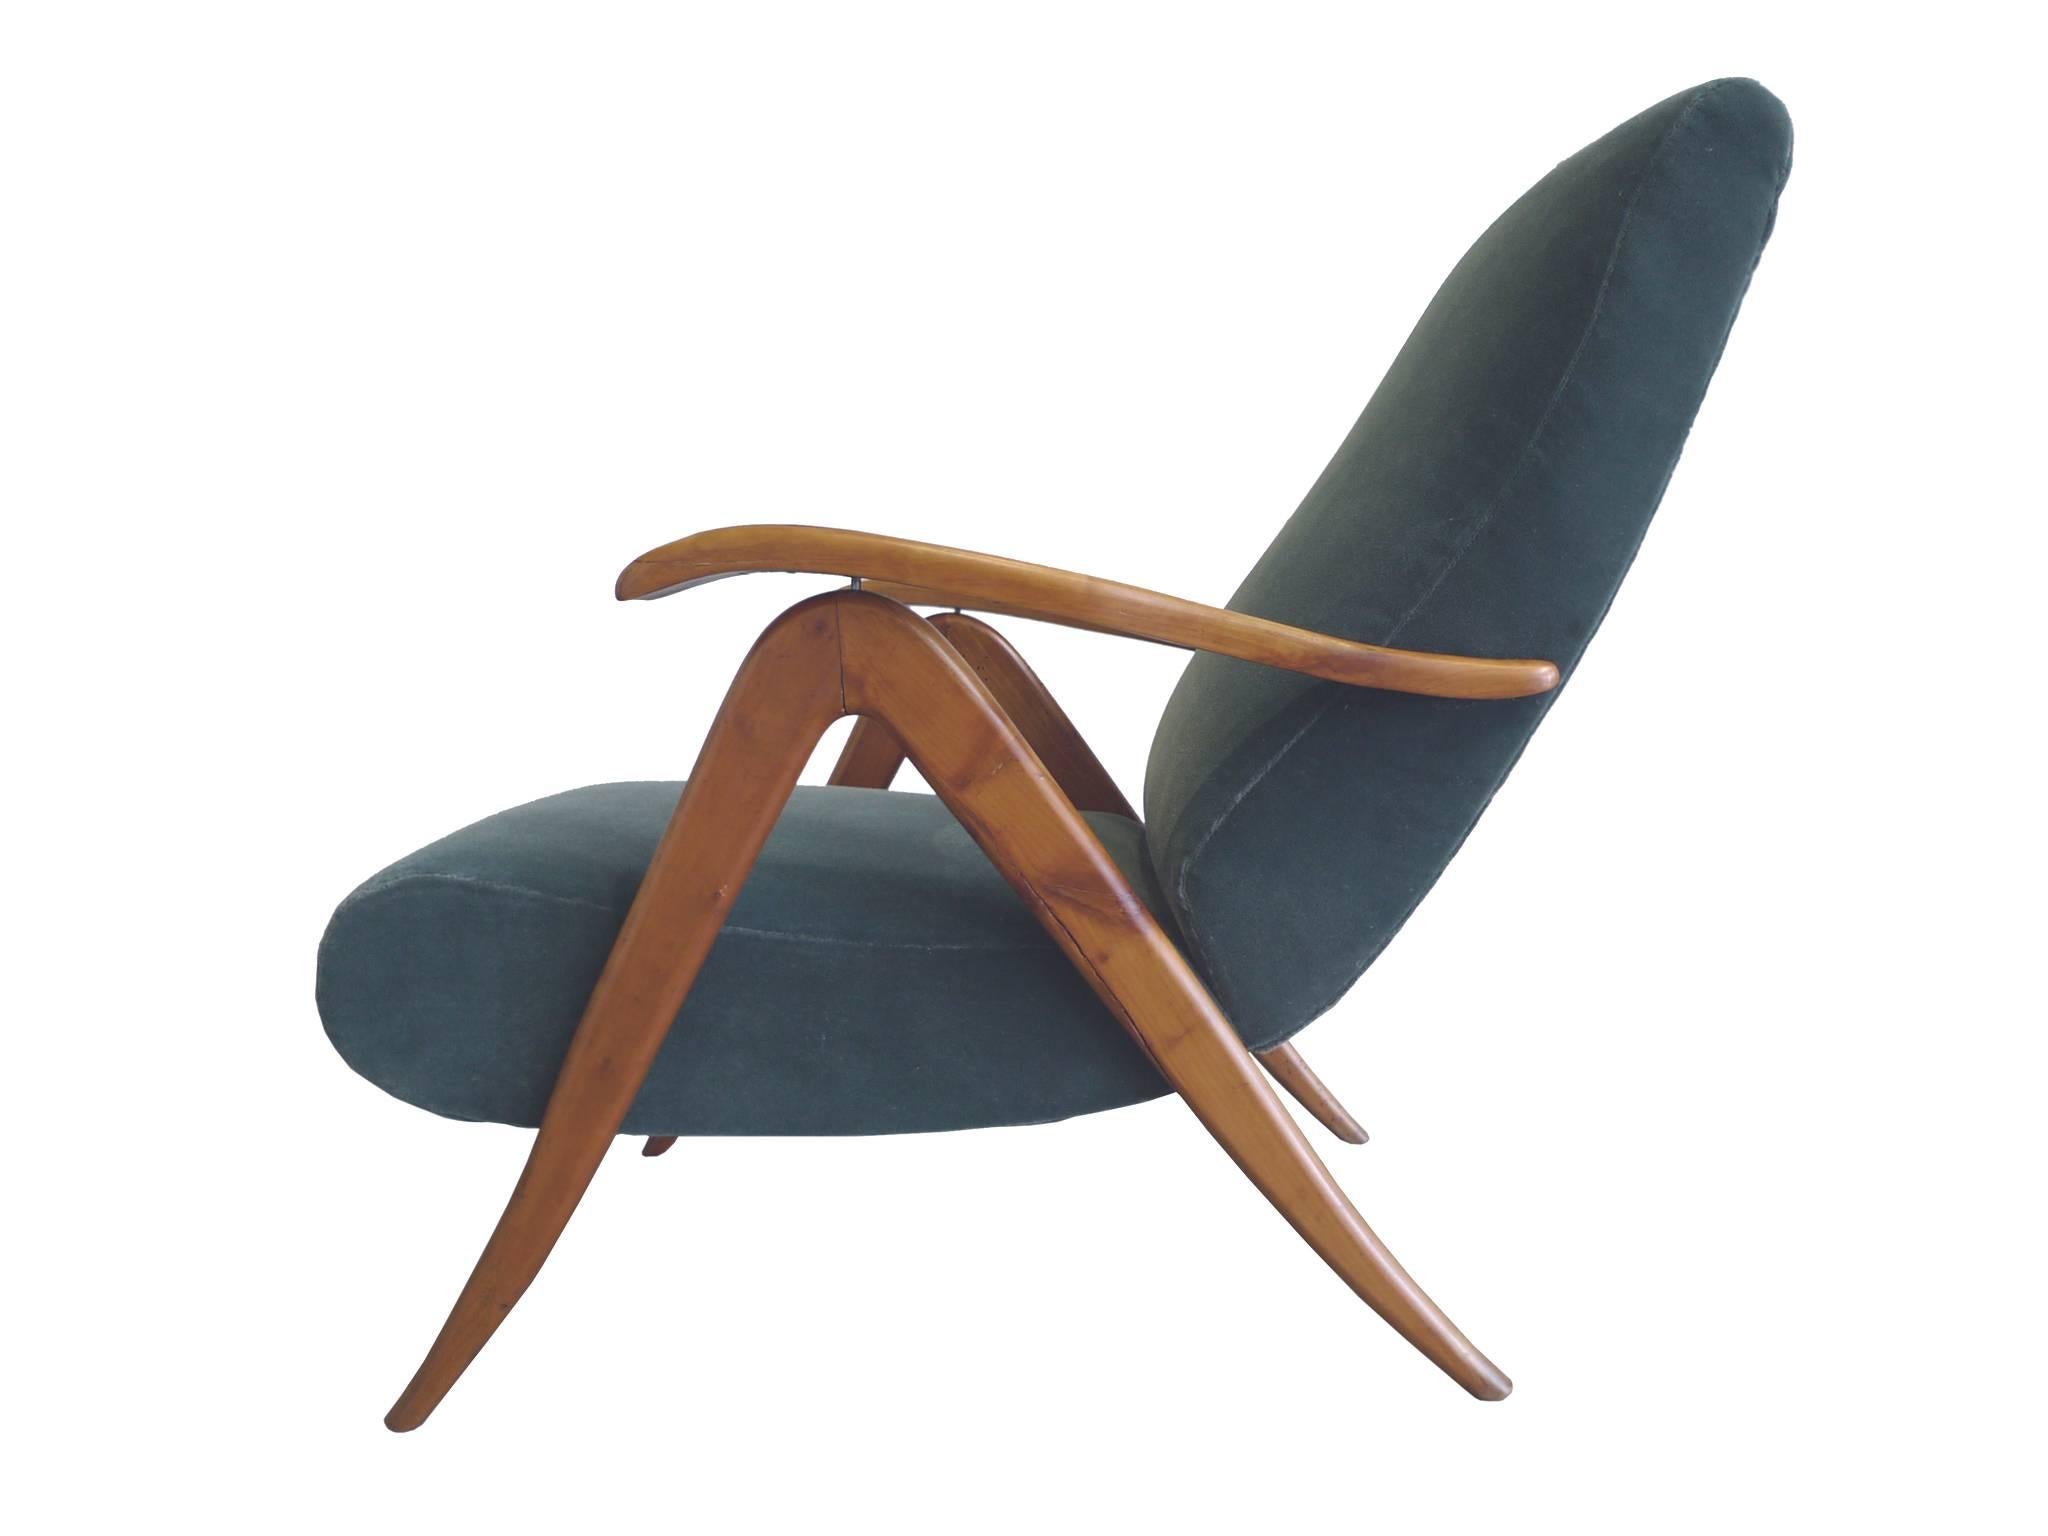 These 1940s reclining armchairs are in the style of Carlo Mollino. Similar to his furniture designs, these chairs make use of sensuous and evocative shapes. You can see these characteristics in the curves and carved quality of the arms and legs,